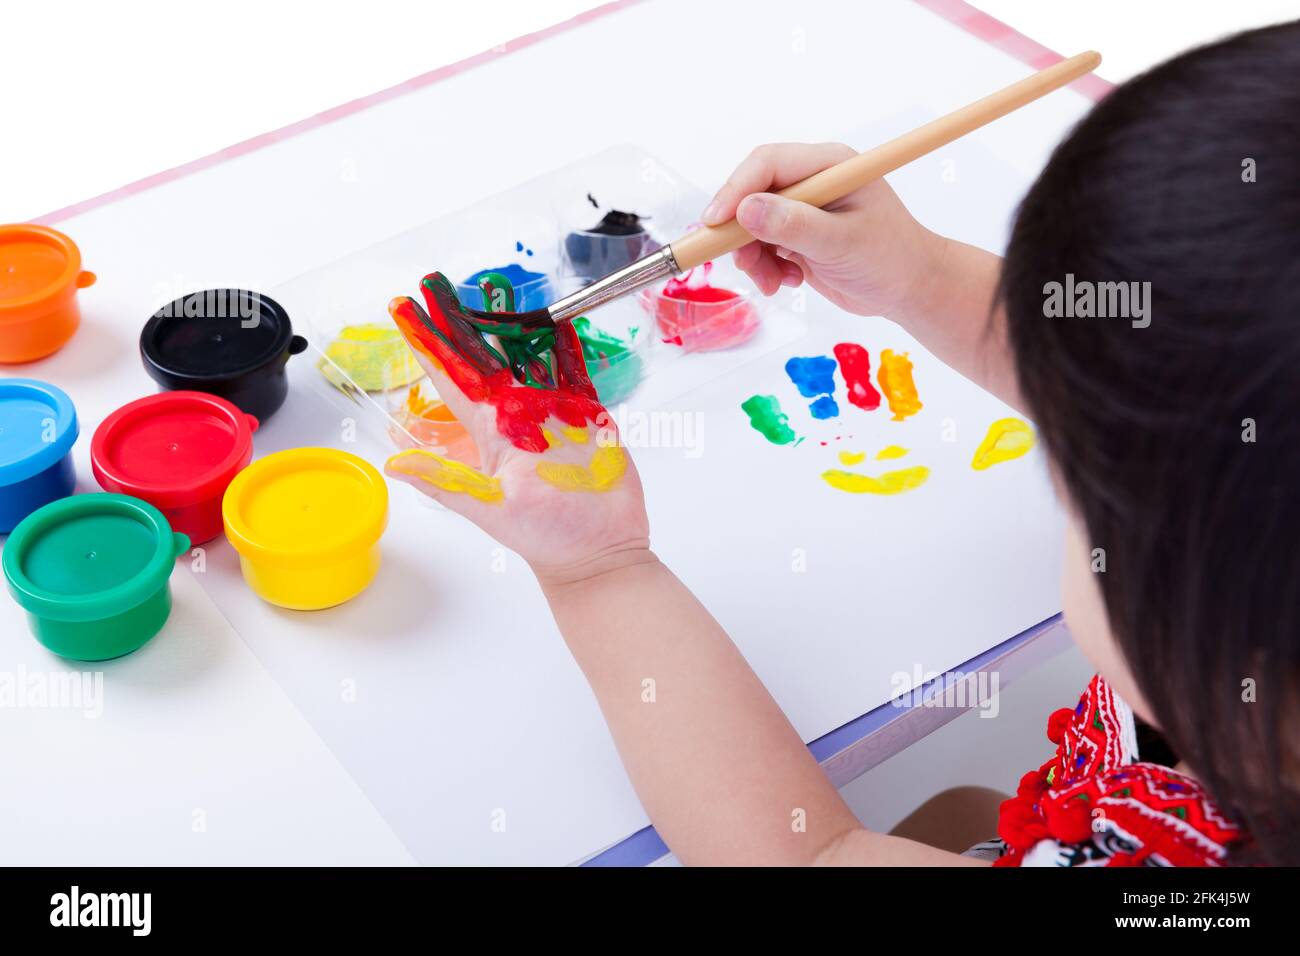 https://c8.alamy.com/comp/2FK4J5W/little-asian-thai-girl-painting-her-palm-using-multicolored-drawing-tools-watercolor-paints-paintbrush-learning-education-of-art-and-creativity-2FK4J5W.jpg